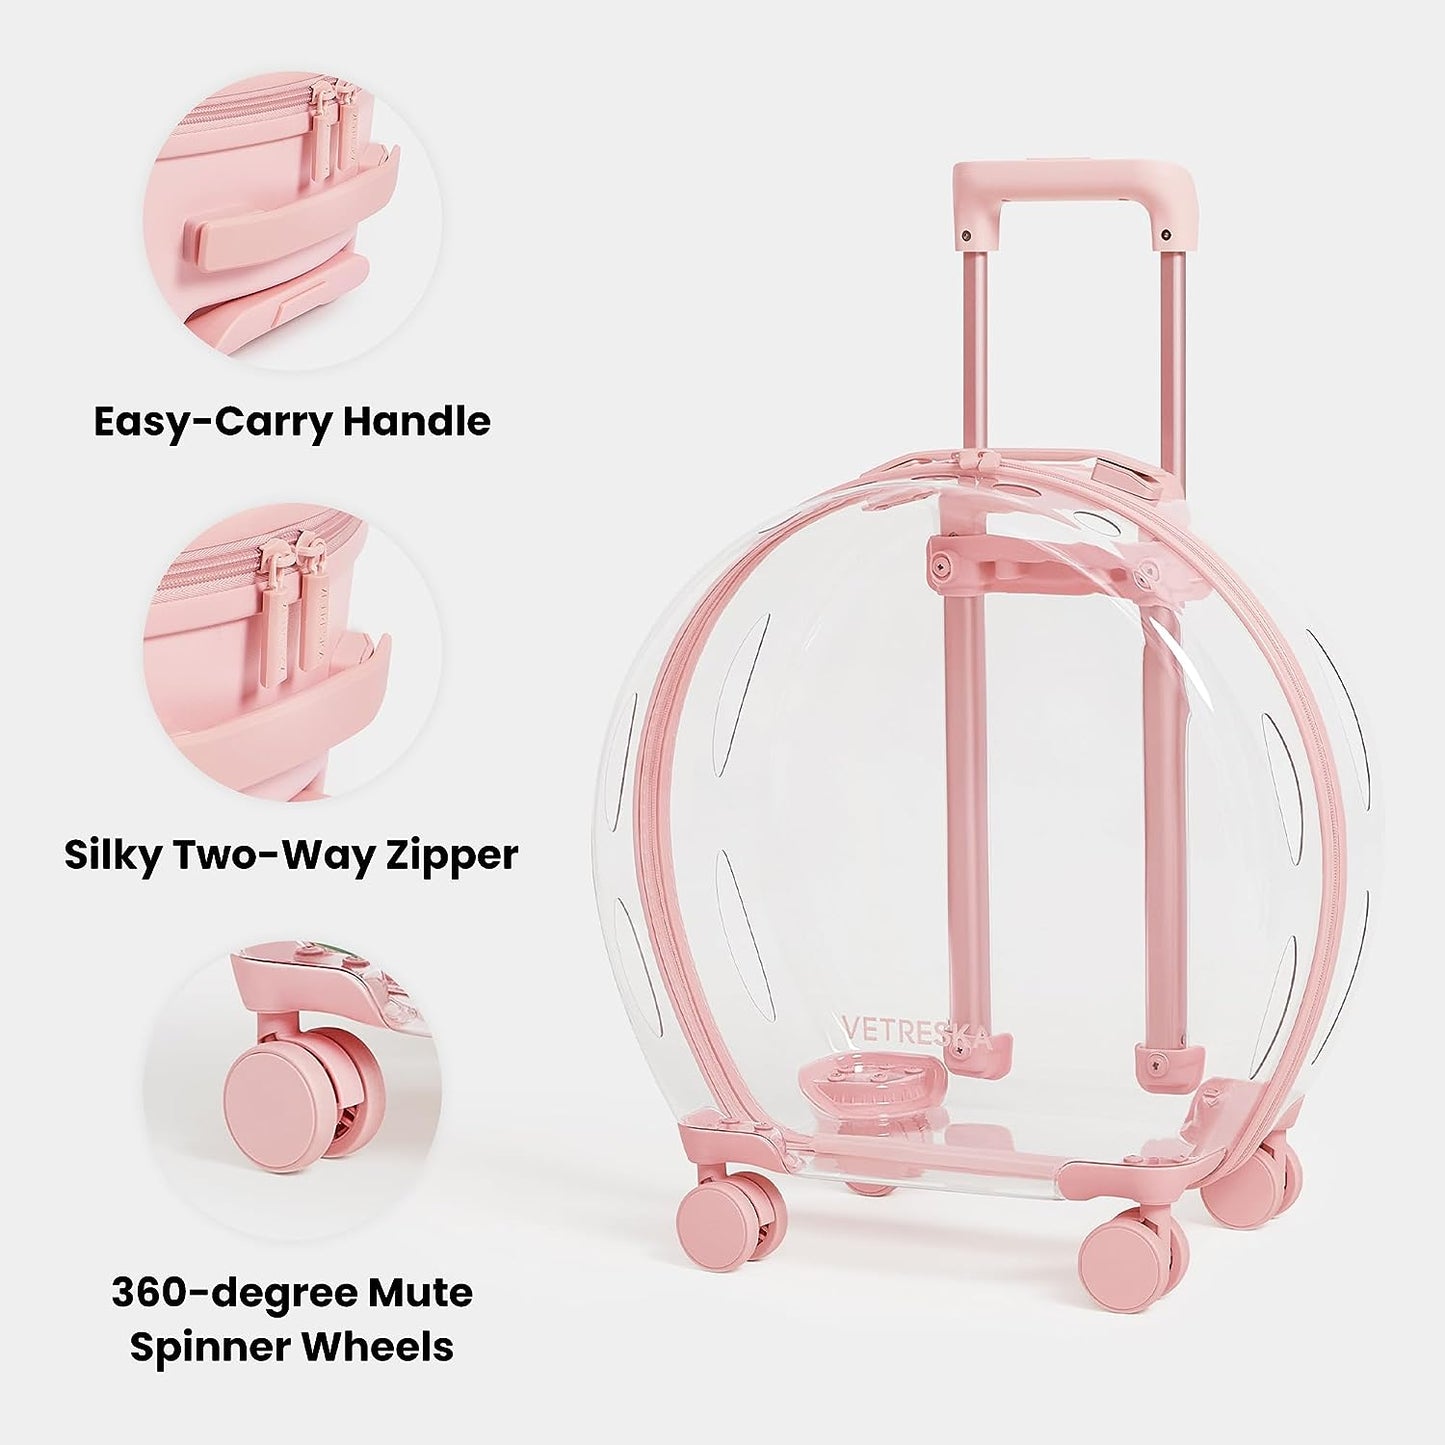 Pink Pet Carrier with Wheels, Telescopic Handle, and 2 Mats - Convenient Pet Travel Luggage for Cats and Small Dogs